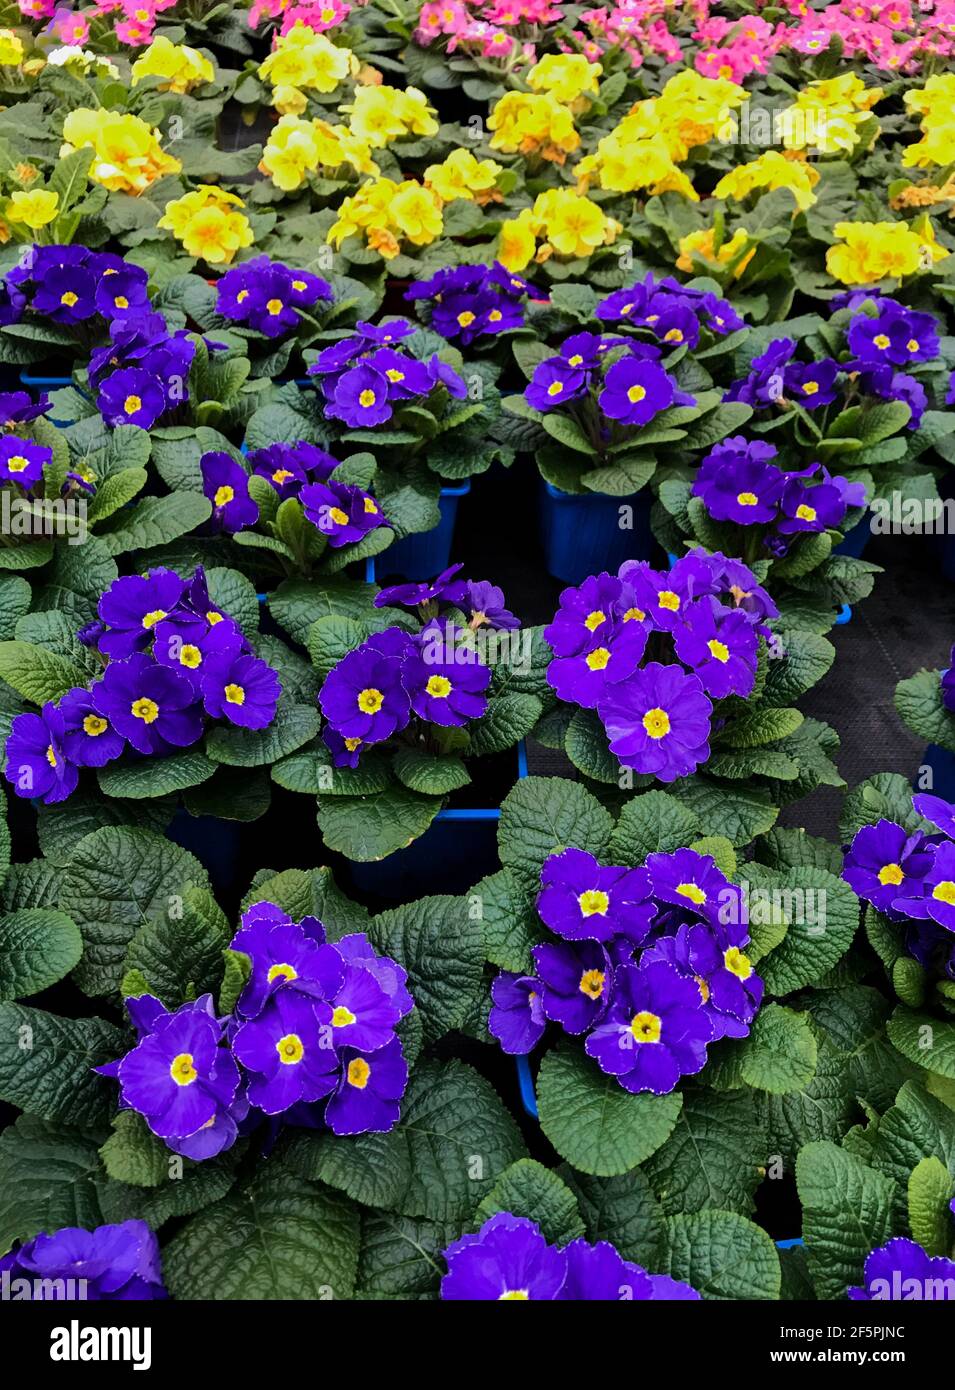 Lots of colorful primrose flowers, also known as cowslip, in flower pots for sale. Stock Photo